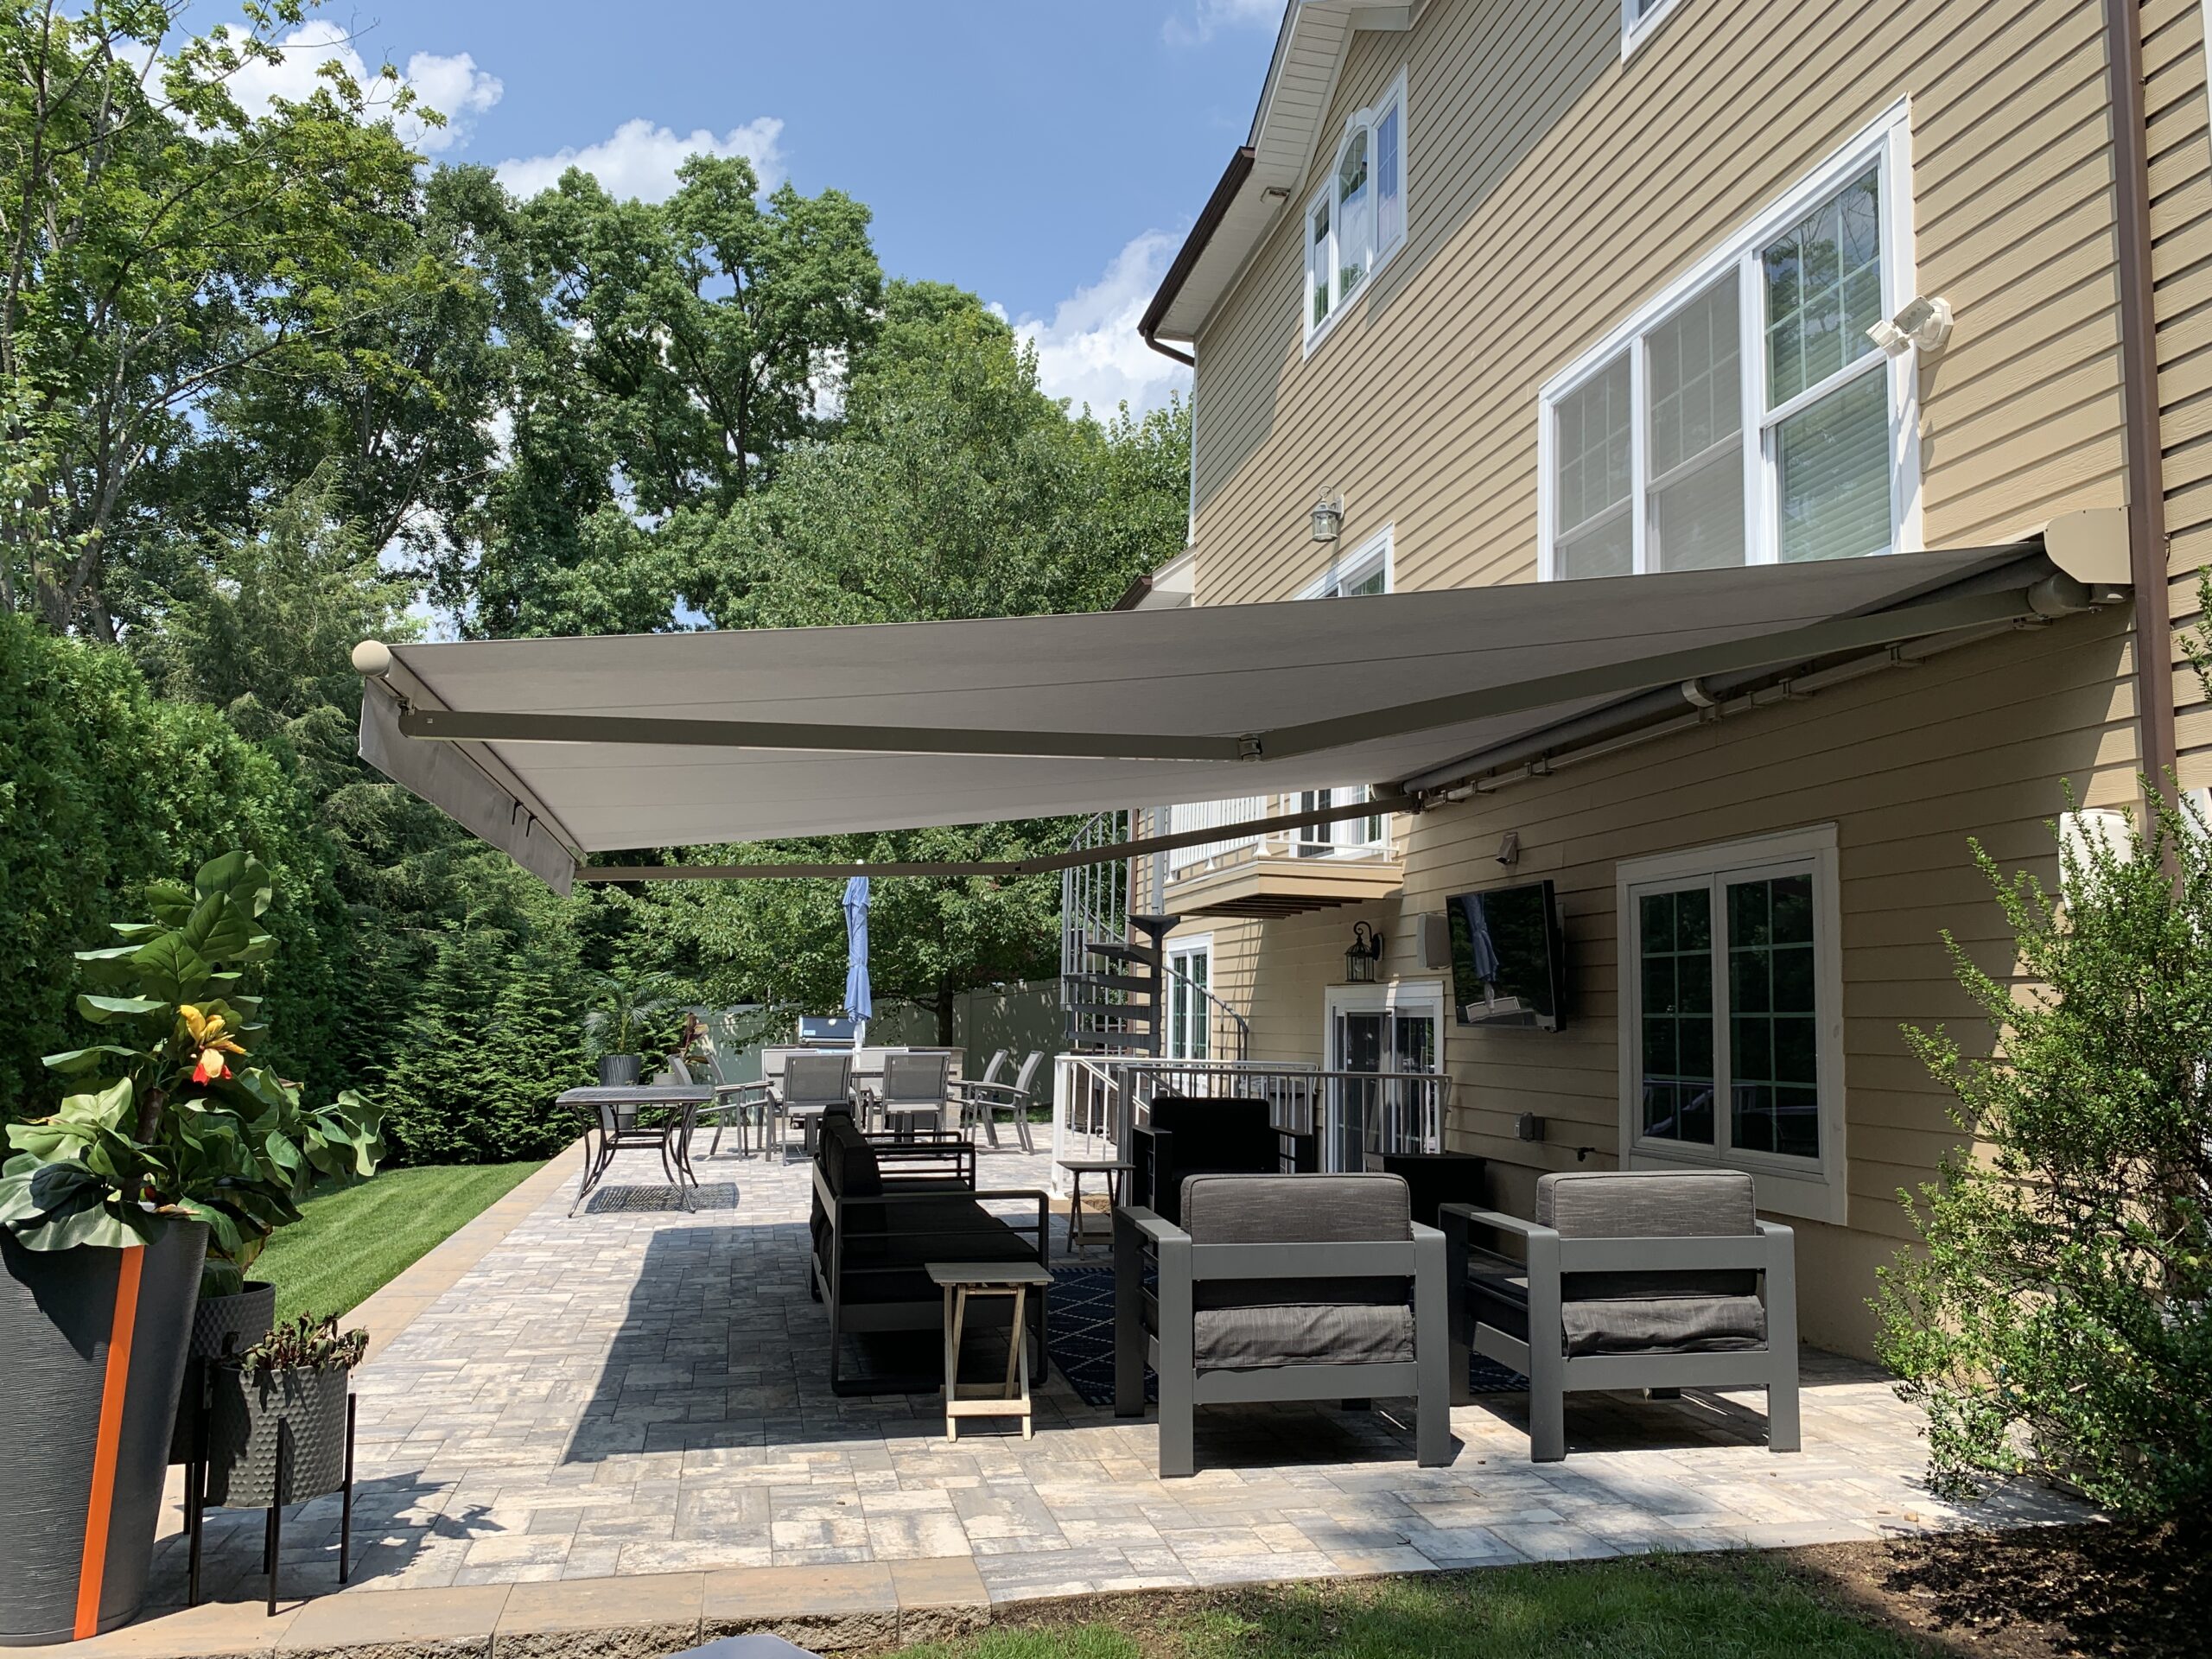 Are retractable awnings worth it?